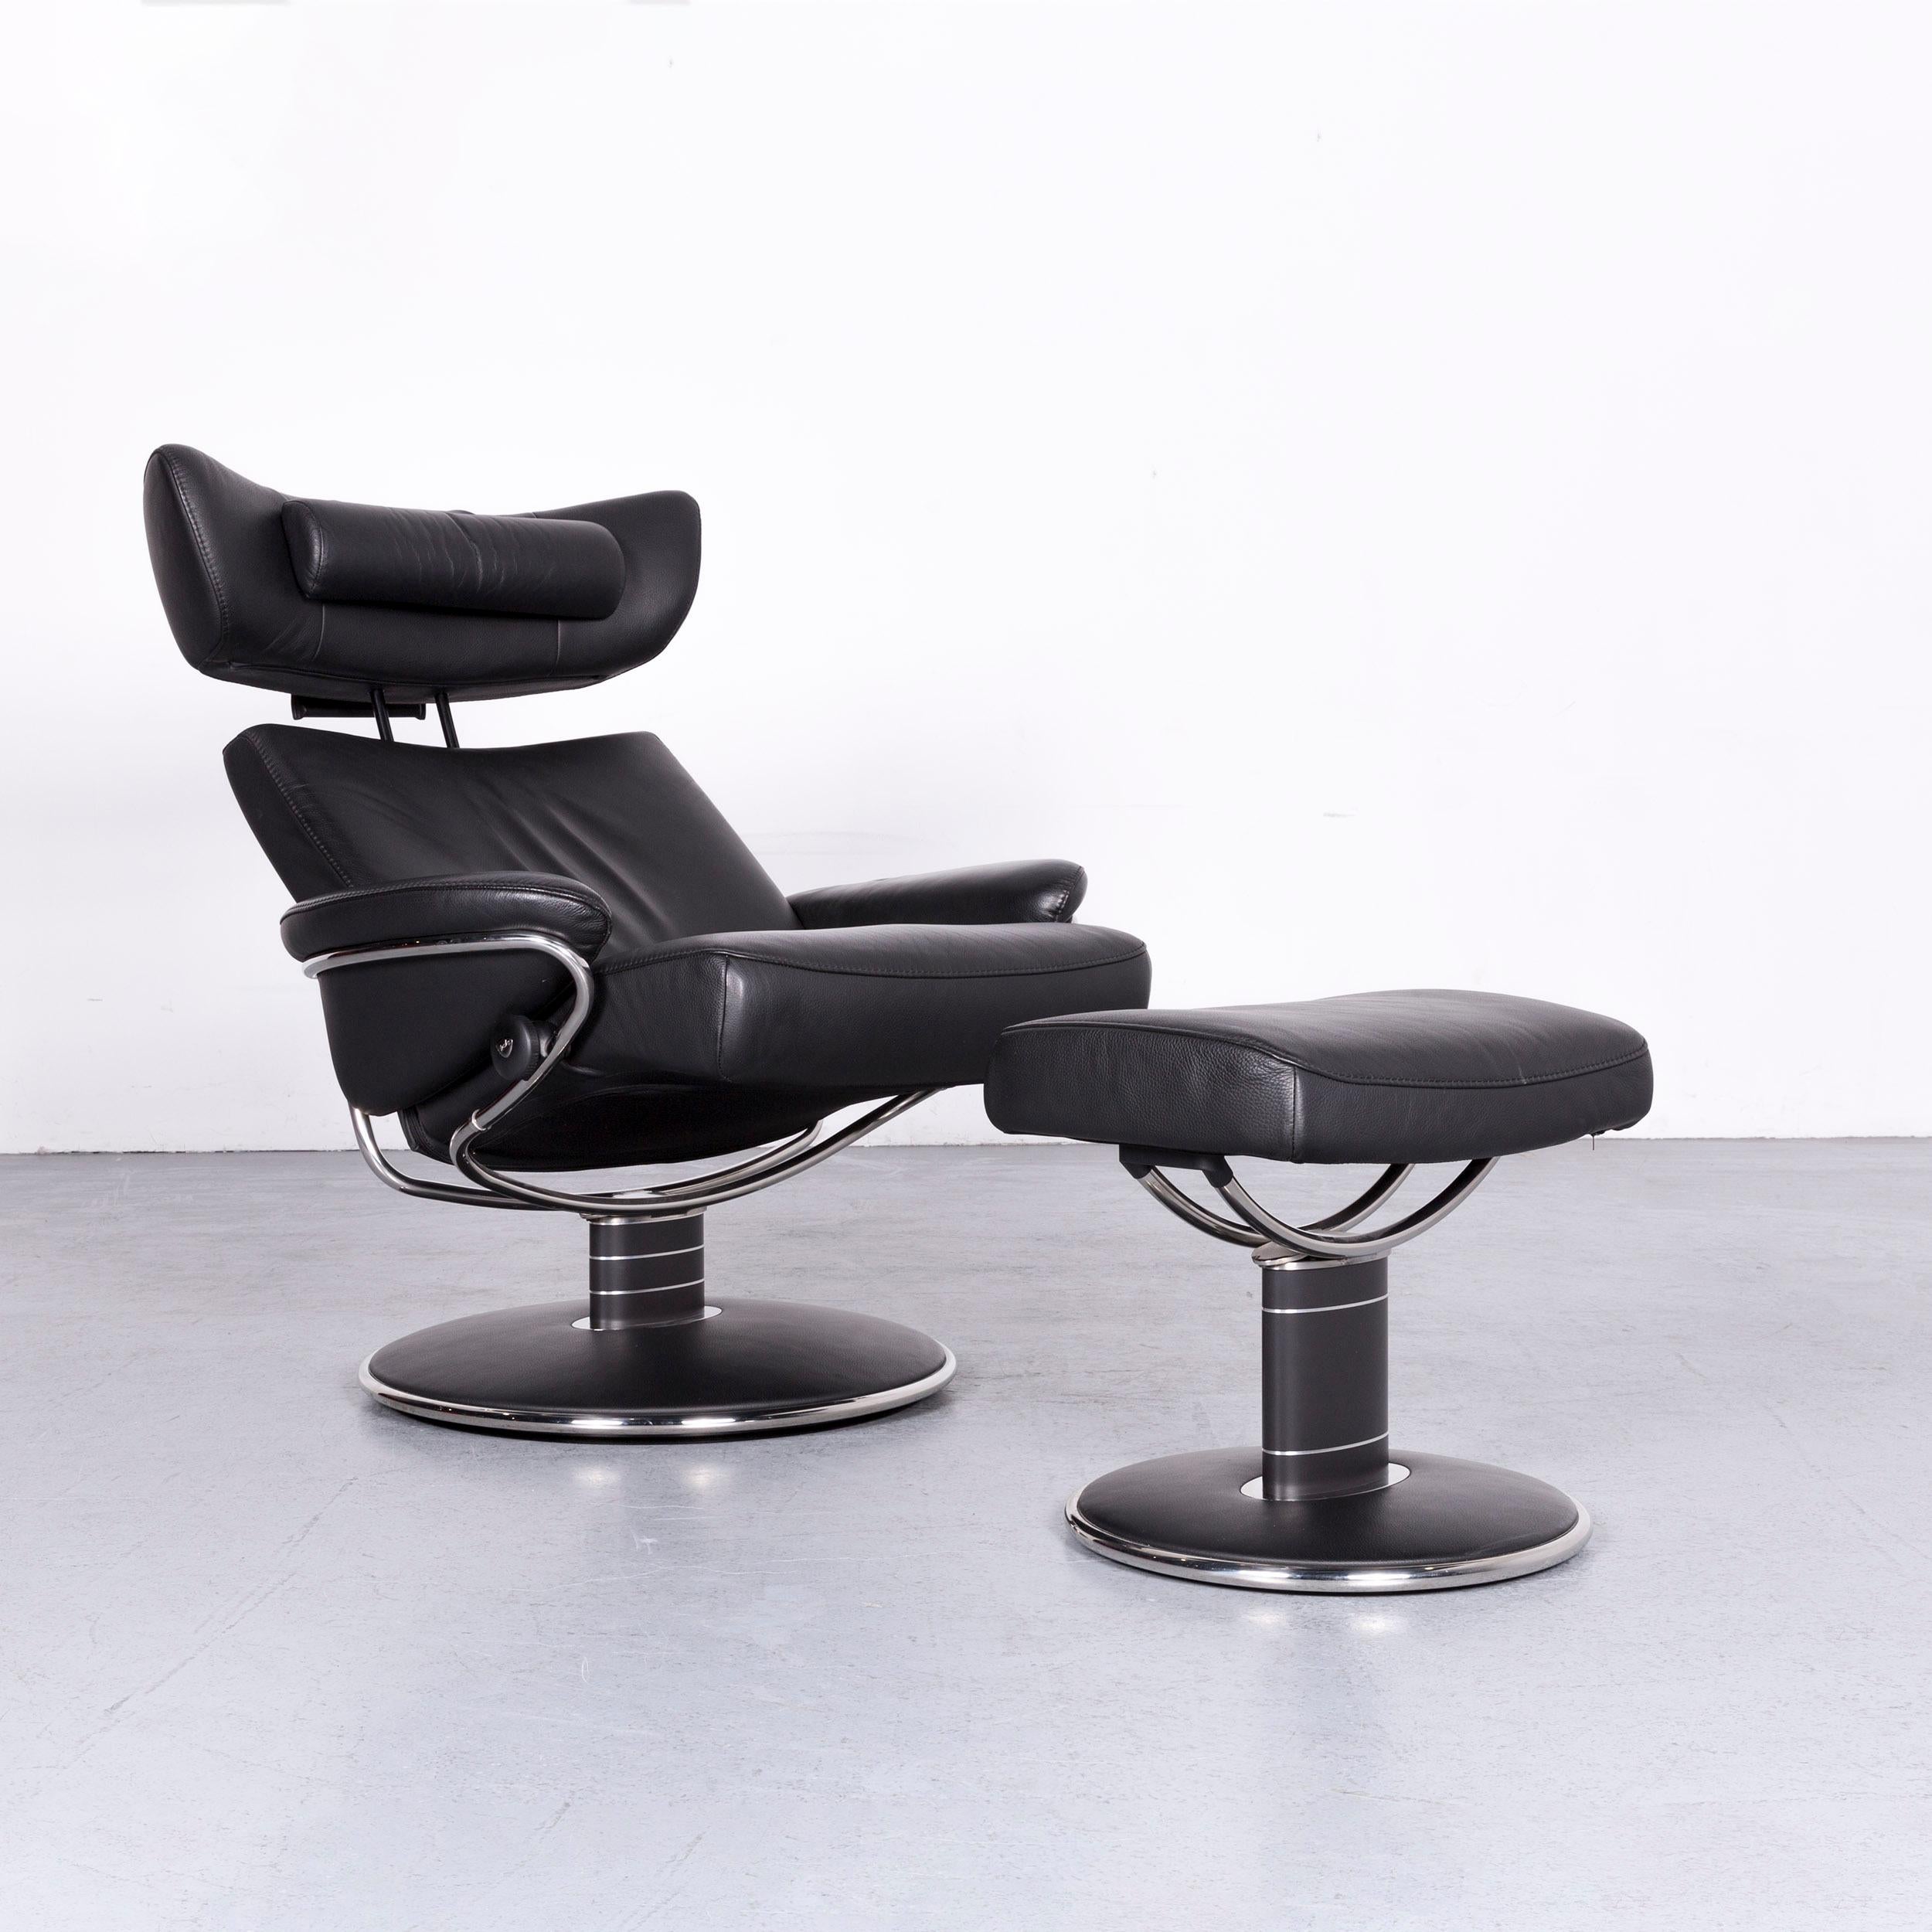 We bring to you an Ekornes Stressless Jazz L designer leather office chair black recliner.